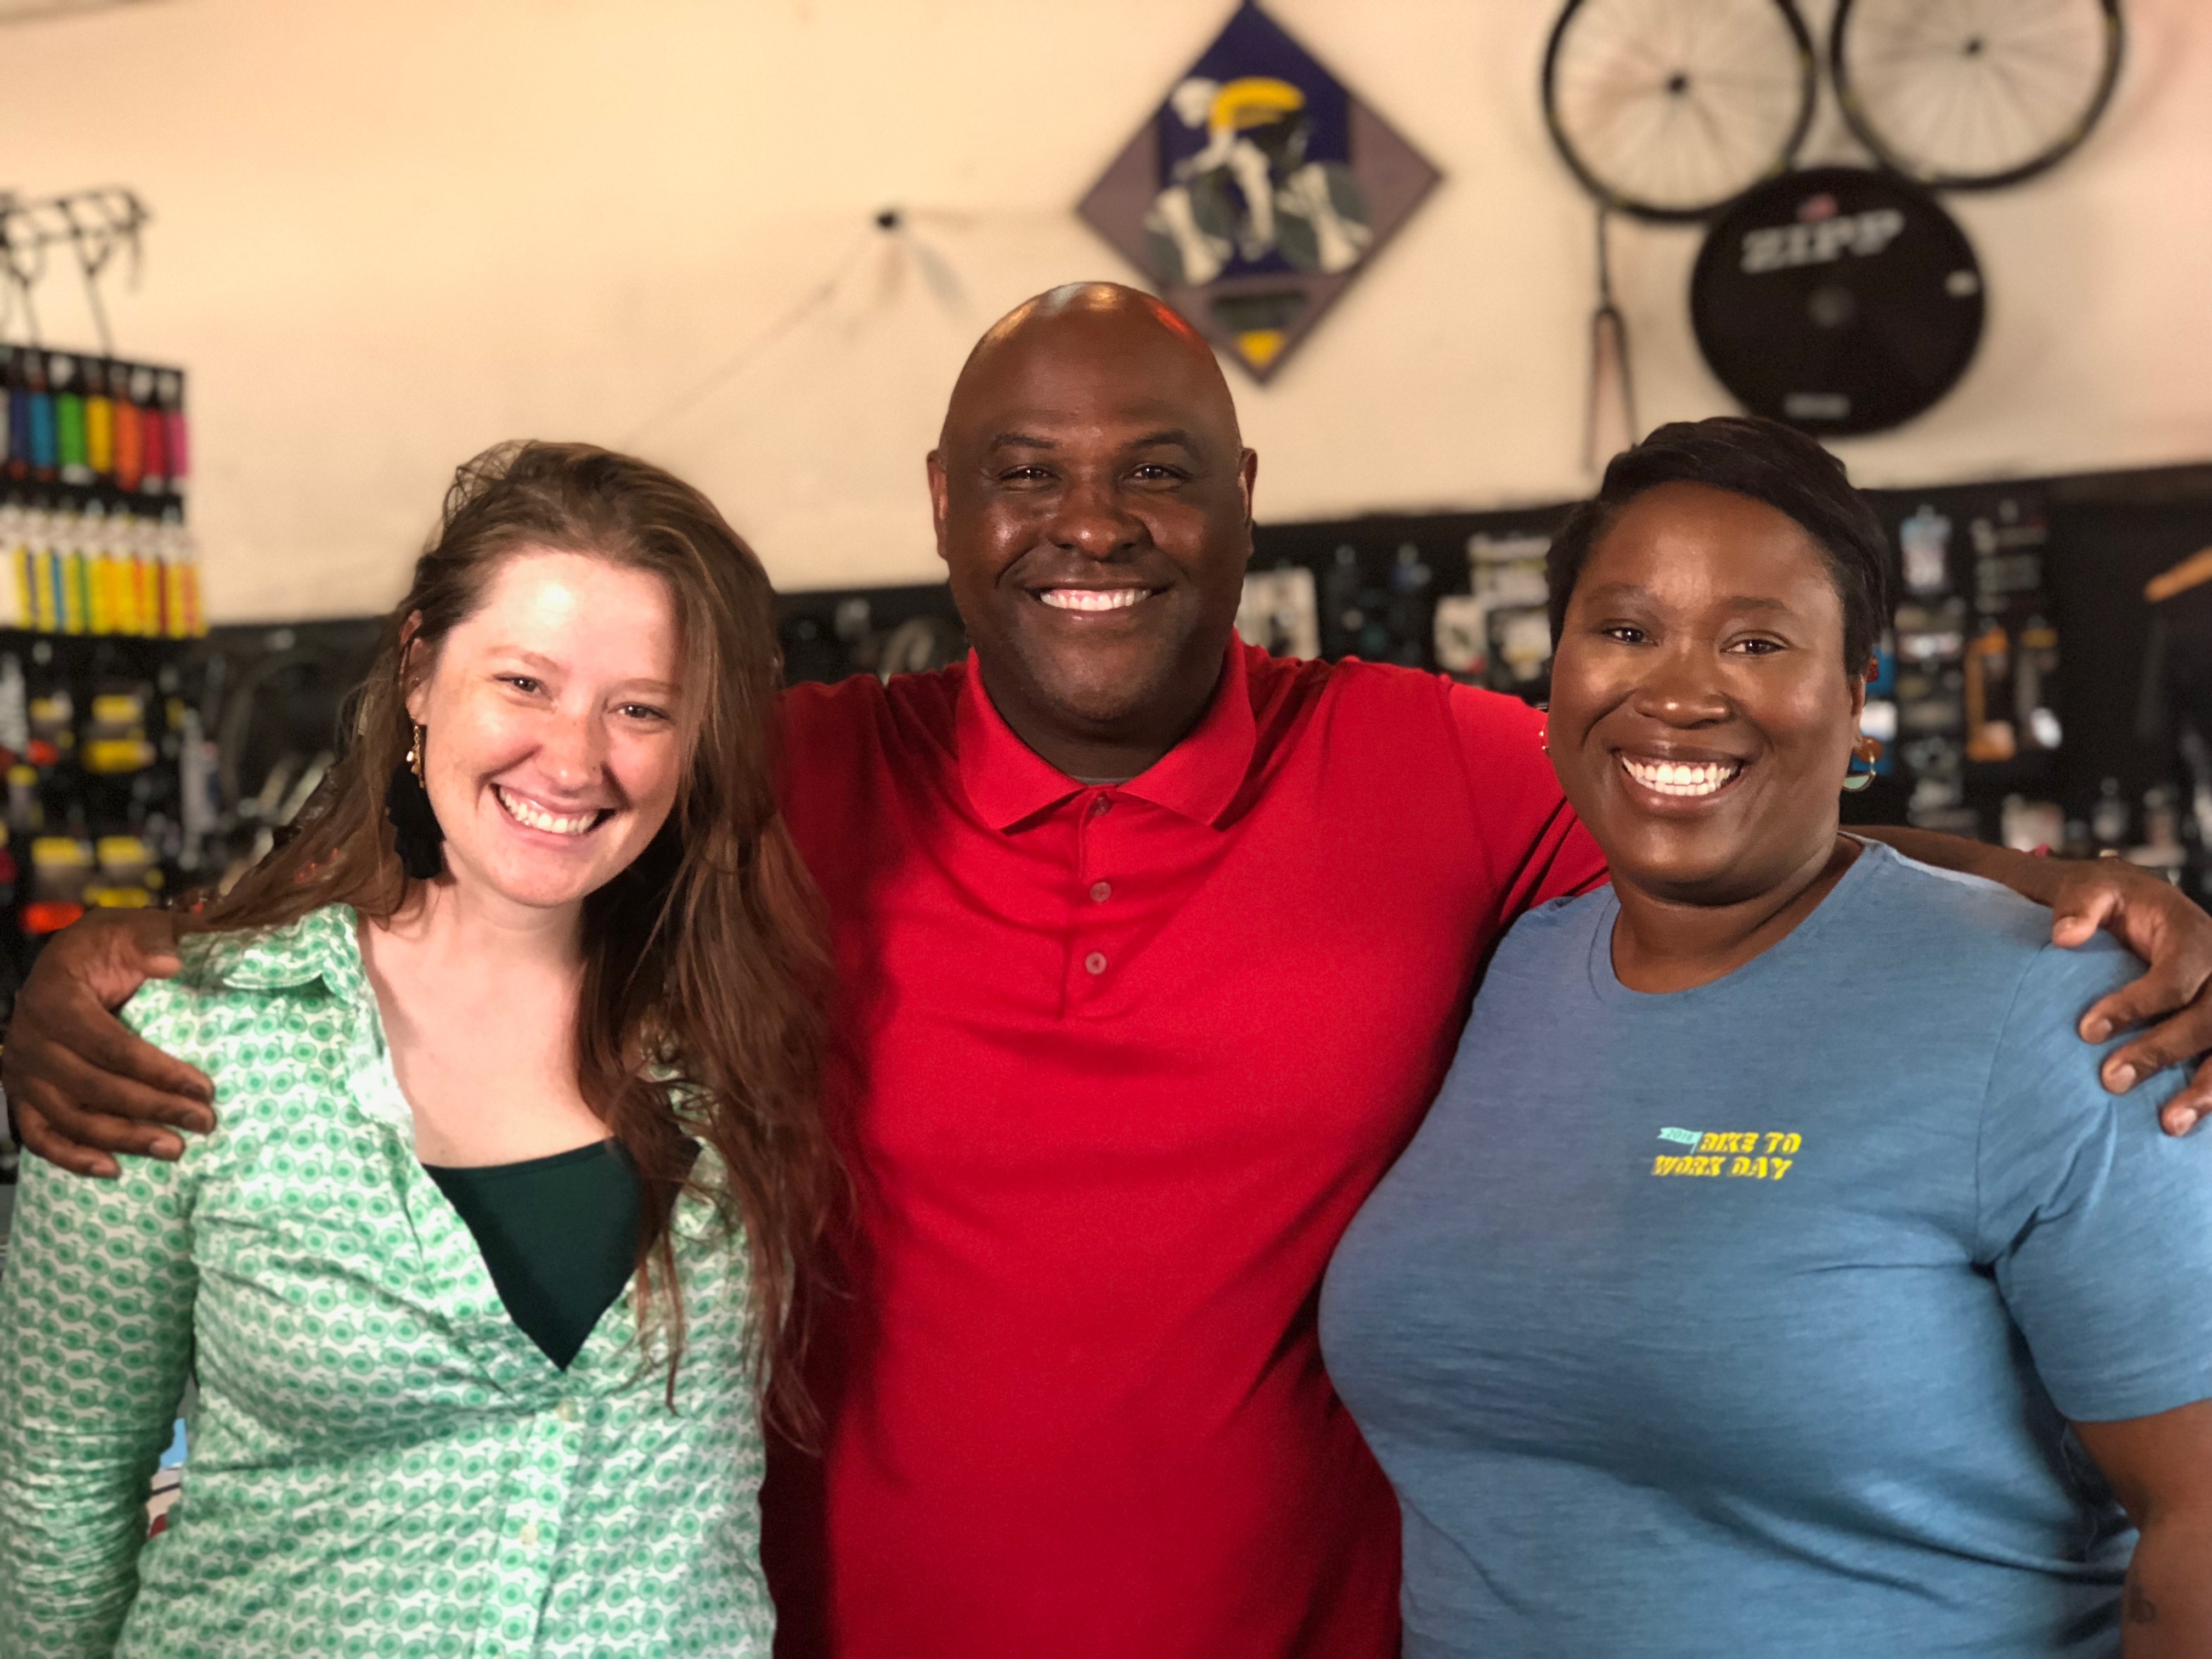 Kathryn Doornbos (far left) on Bike To Work Day in 2018. She&#039;s joined by Jeh Jeh Pruitt of WBRC and Jeniese Hosey of the Regional Planning Commission of Greater Birmingham. Photo courtesy of Kathryn Doornbos.